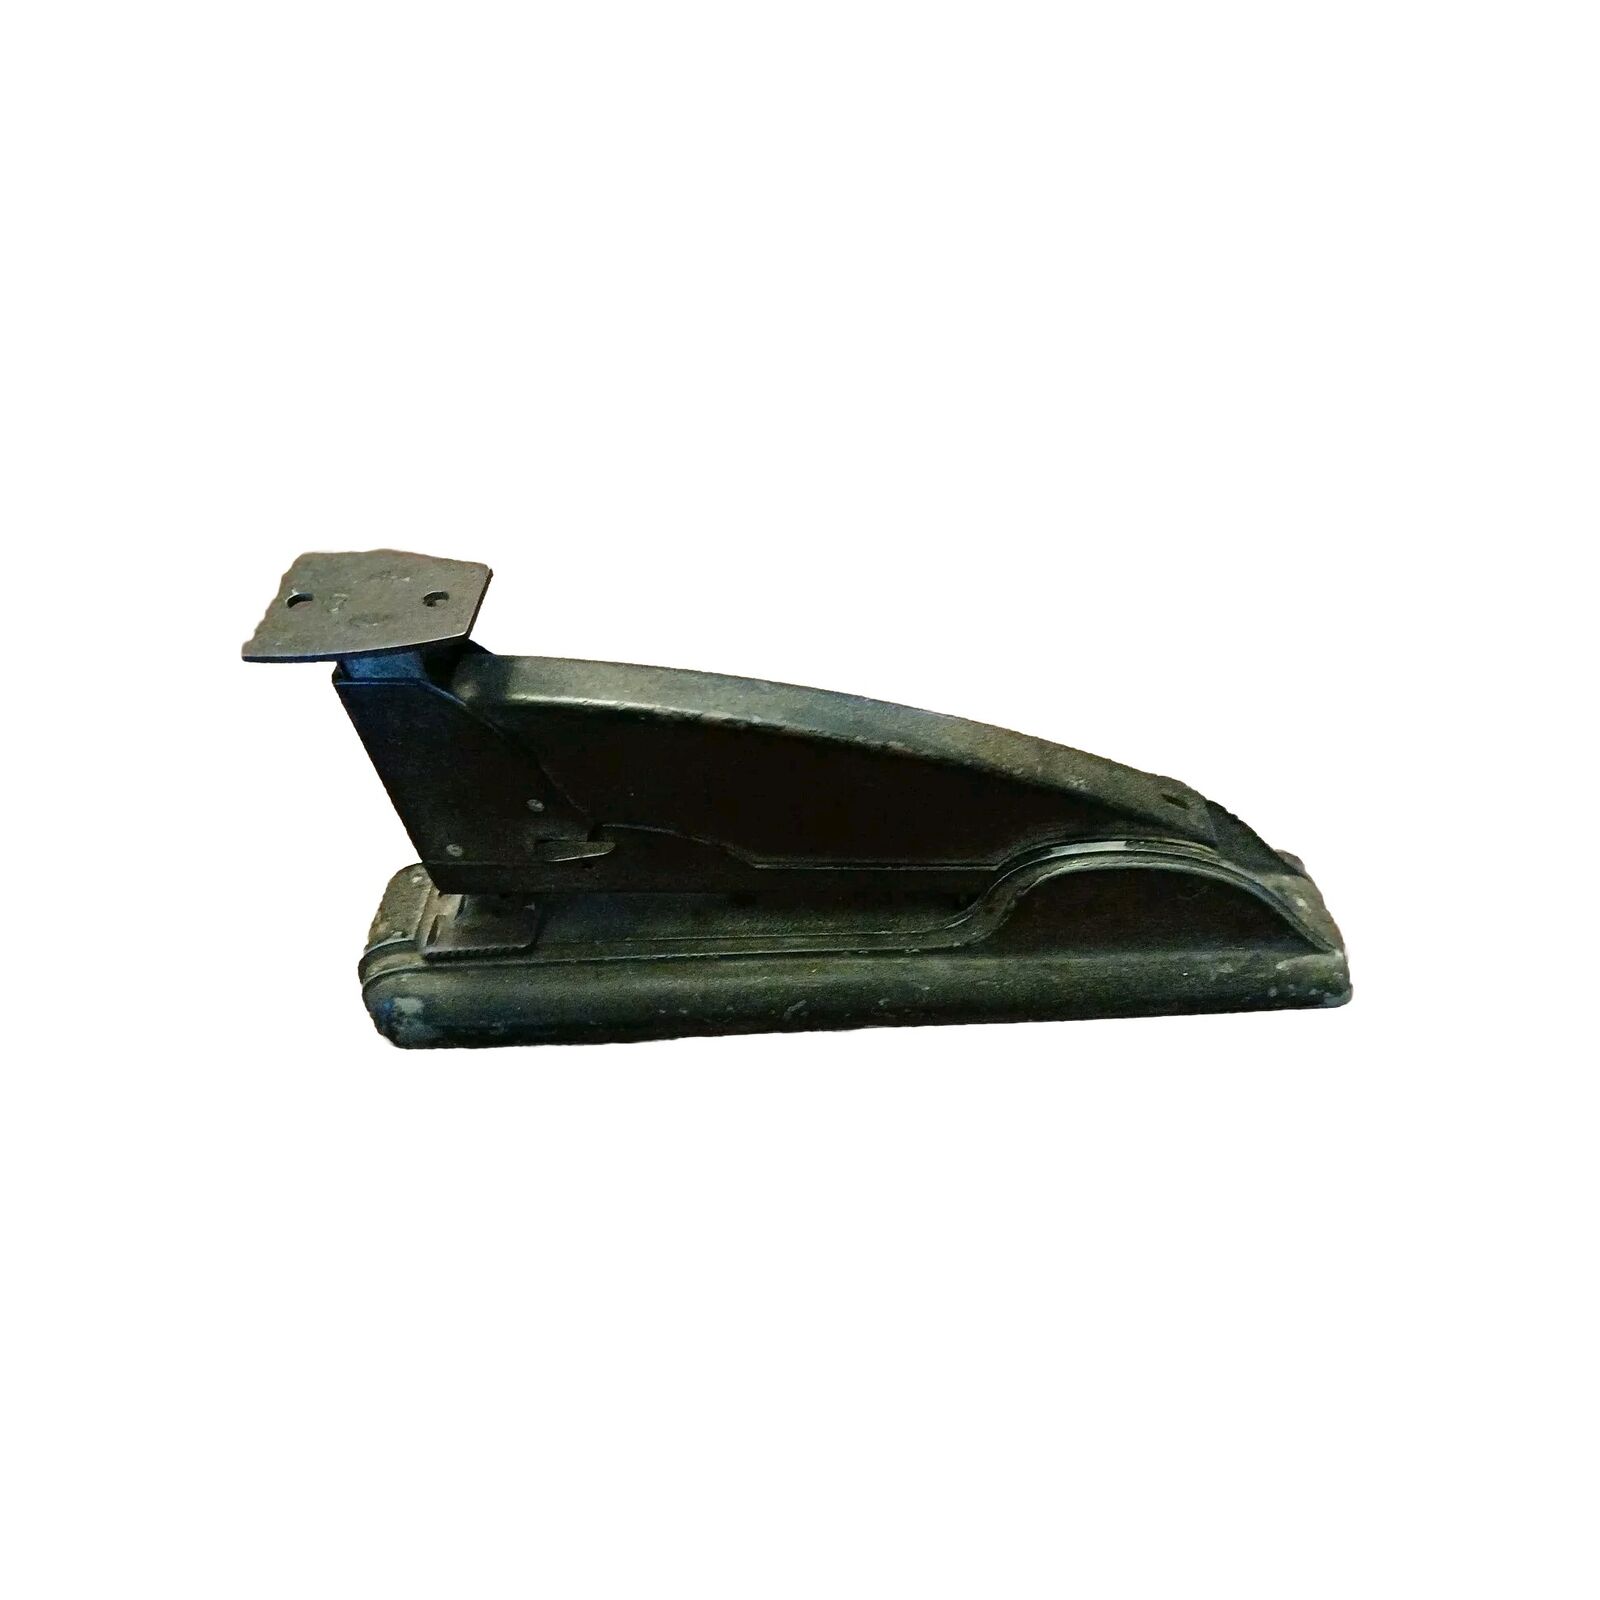 Old Vintage Speed Products Art Deco Stapler: Long Island City New York YS A31b